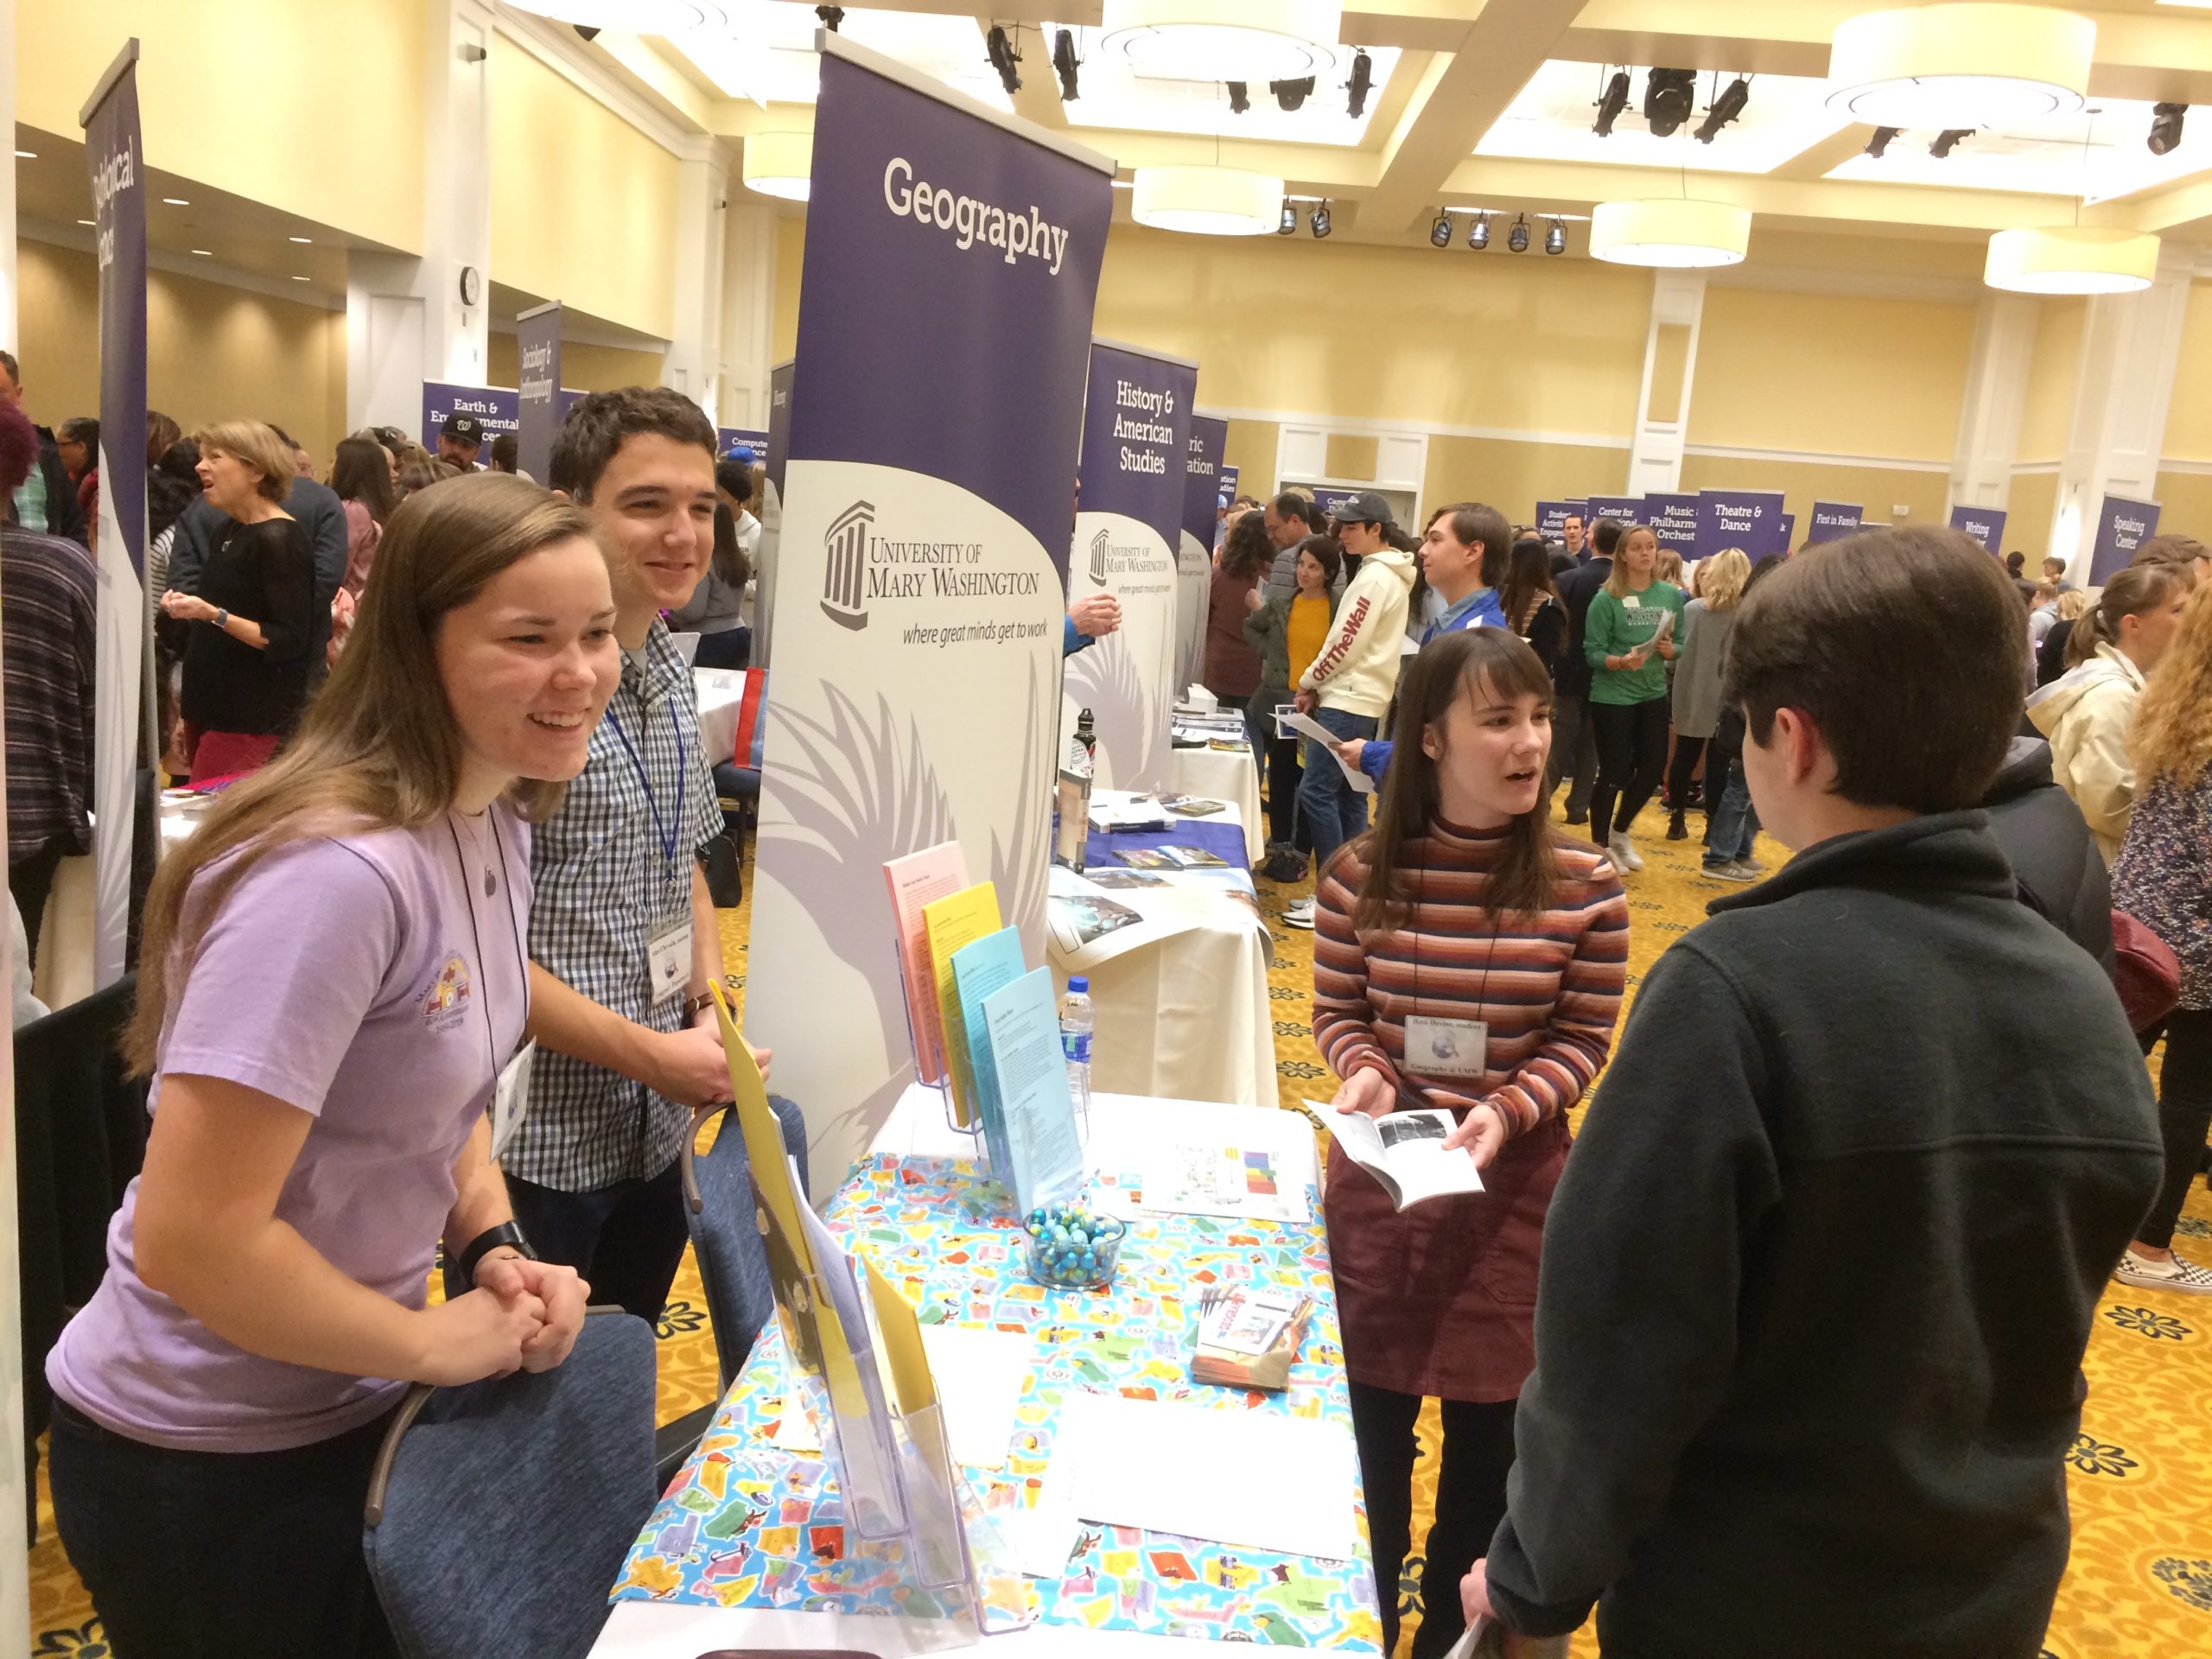 Geography majors hosting our table at an Open House event, fall 2019